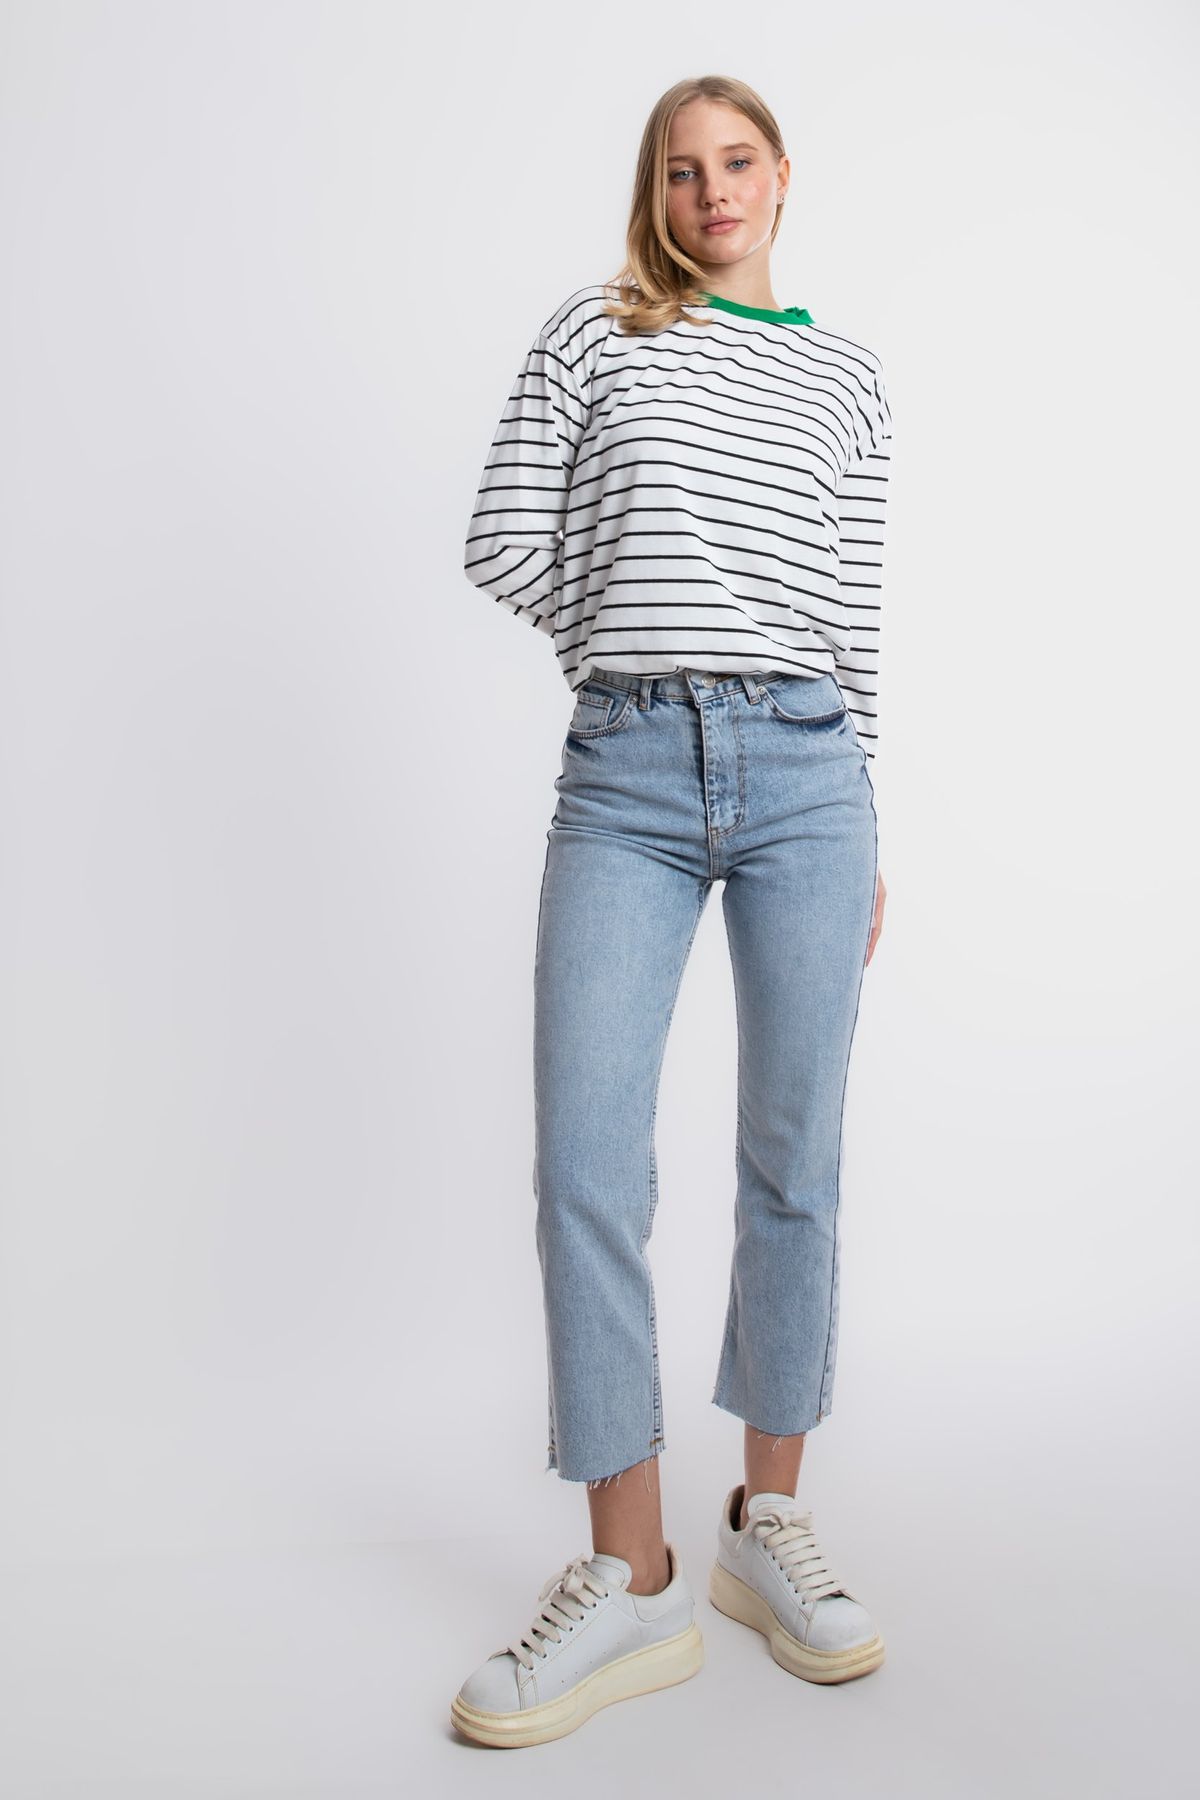 Striped Crew Neck Relaxed Sweatshirt with a Neck Detail